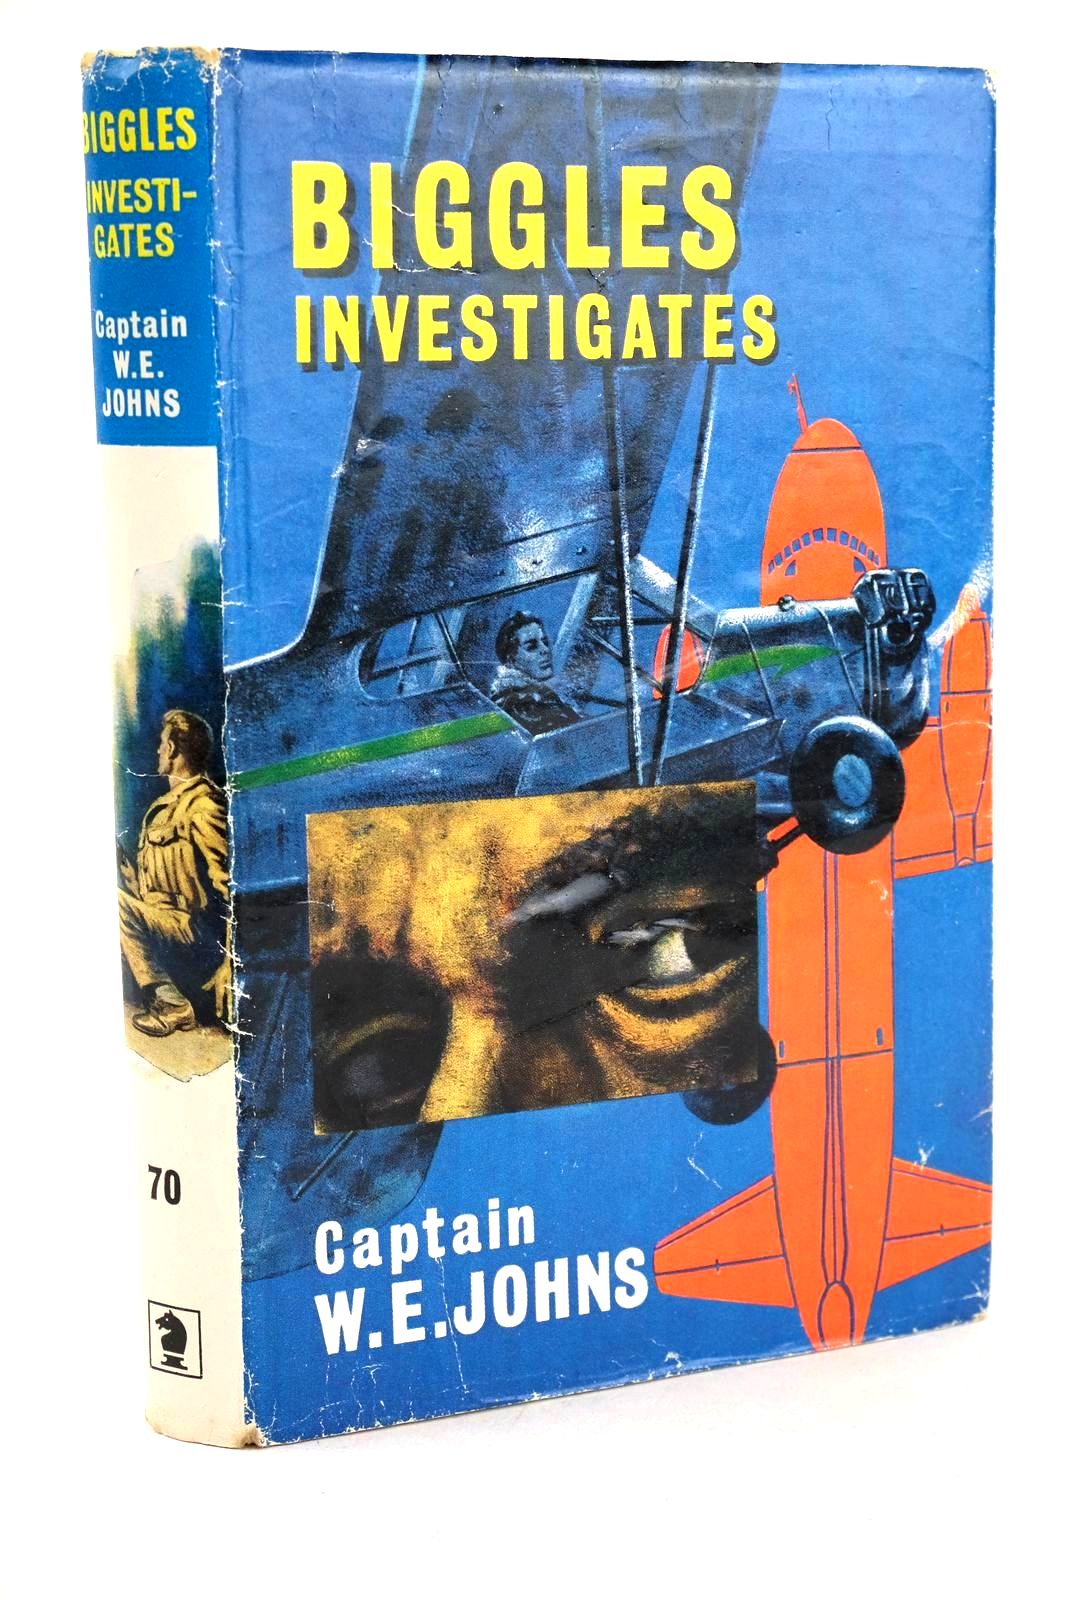 Photo of BIGGLES INVESTIGATES written by Johns, W.E. illustrated by Stead, Leslie published by Brockhampton Press (STOCK CODE: 1326618)  for sale by Stella & Rose's Books